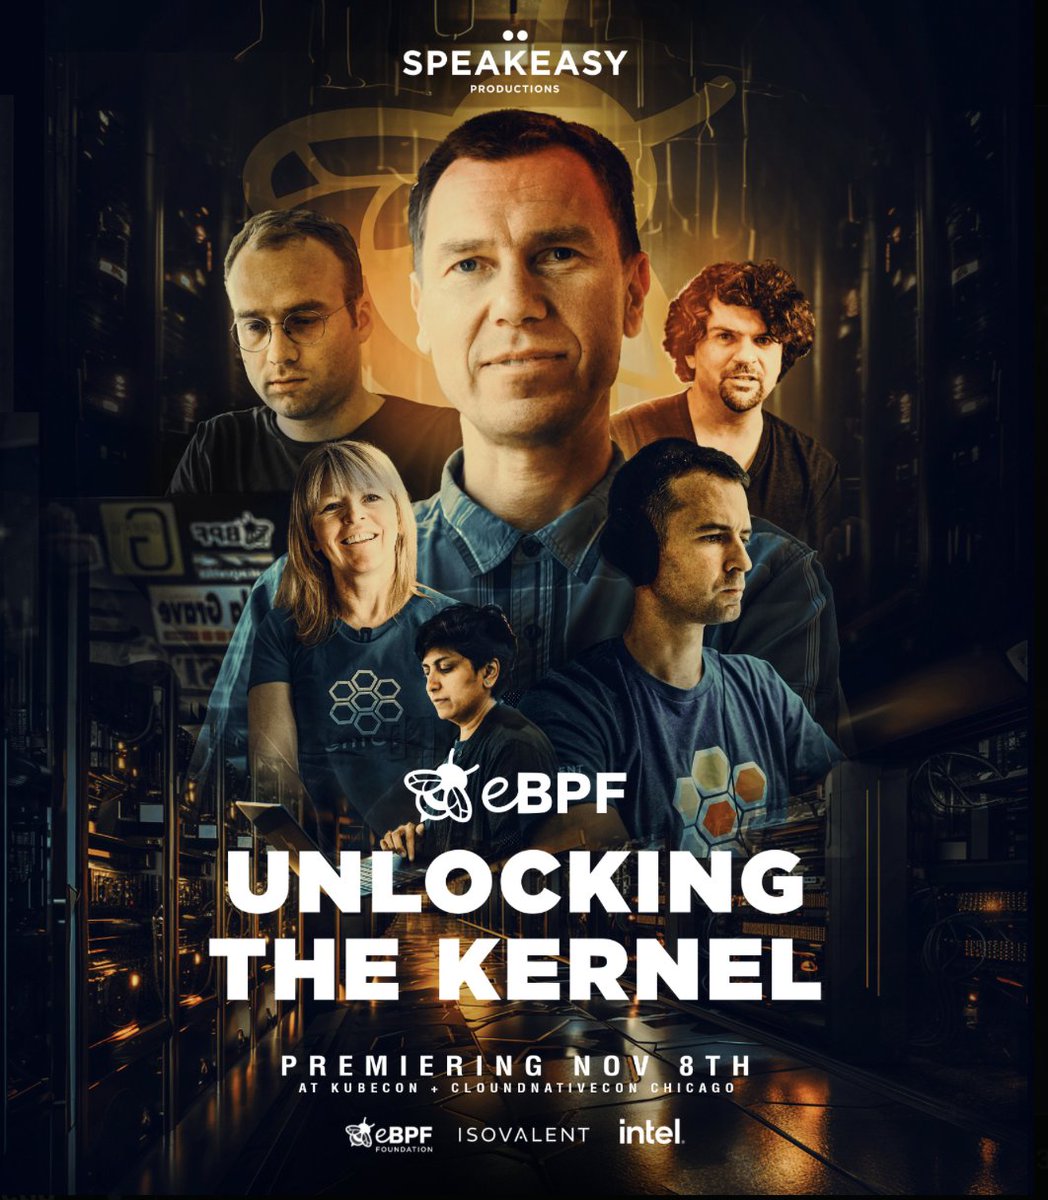 Are you at #Kubecon? If so, don't miss the world premiere of the documentary eBPF: Unlocking the Kernel tomorrow! It's all happening on 11/8 at 4:15 pm PT/6:15 pm CT. #eBPF #UnlockingtheKernel ebpfdocumentary.com